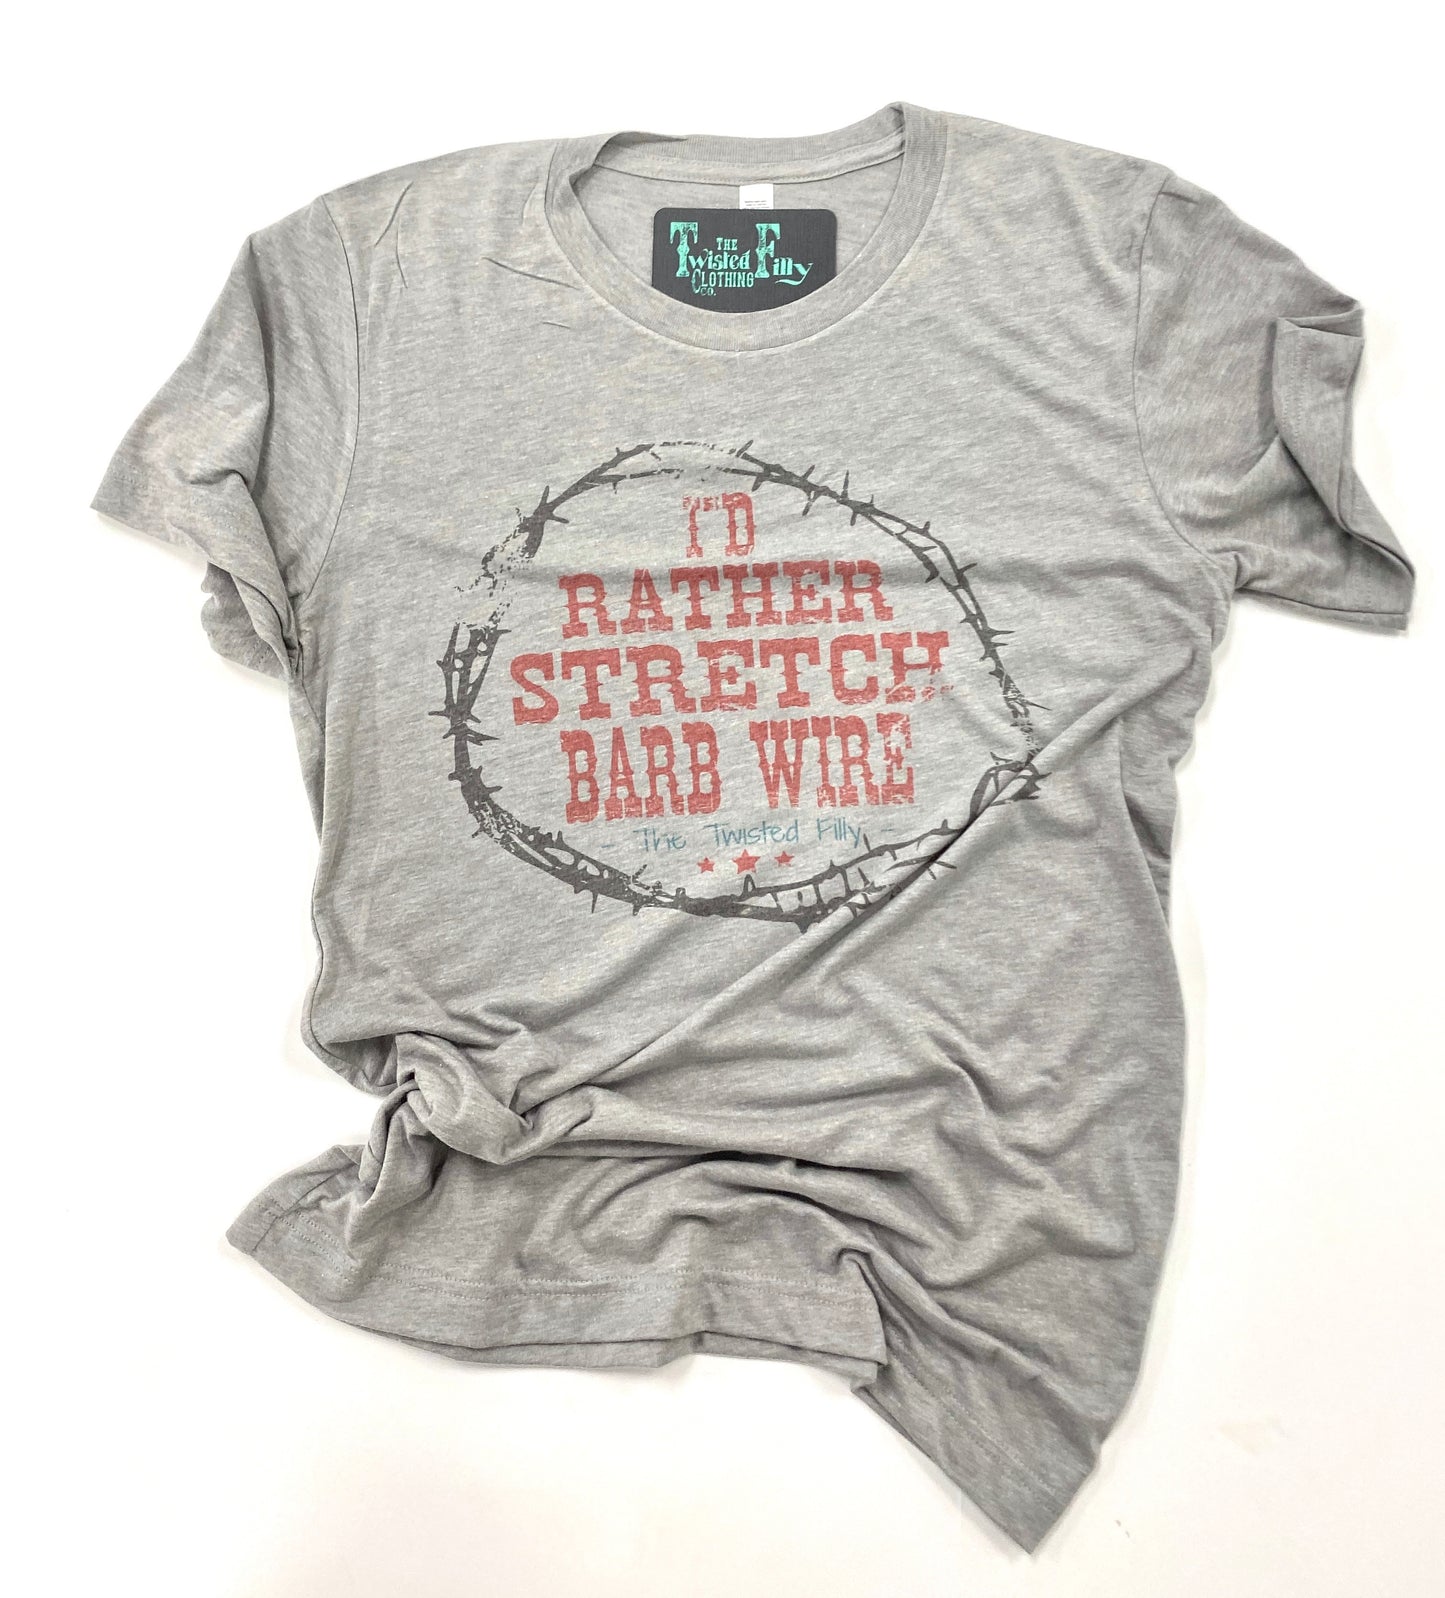 I'd Rather Stretch Barb Wire - S/S Adult Crew Neck Tee - Gray